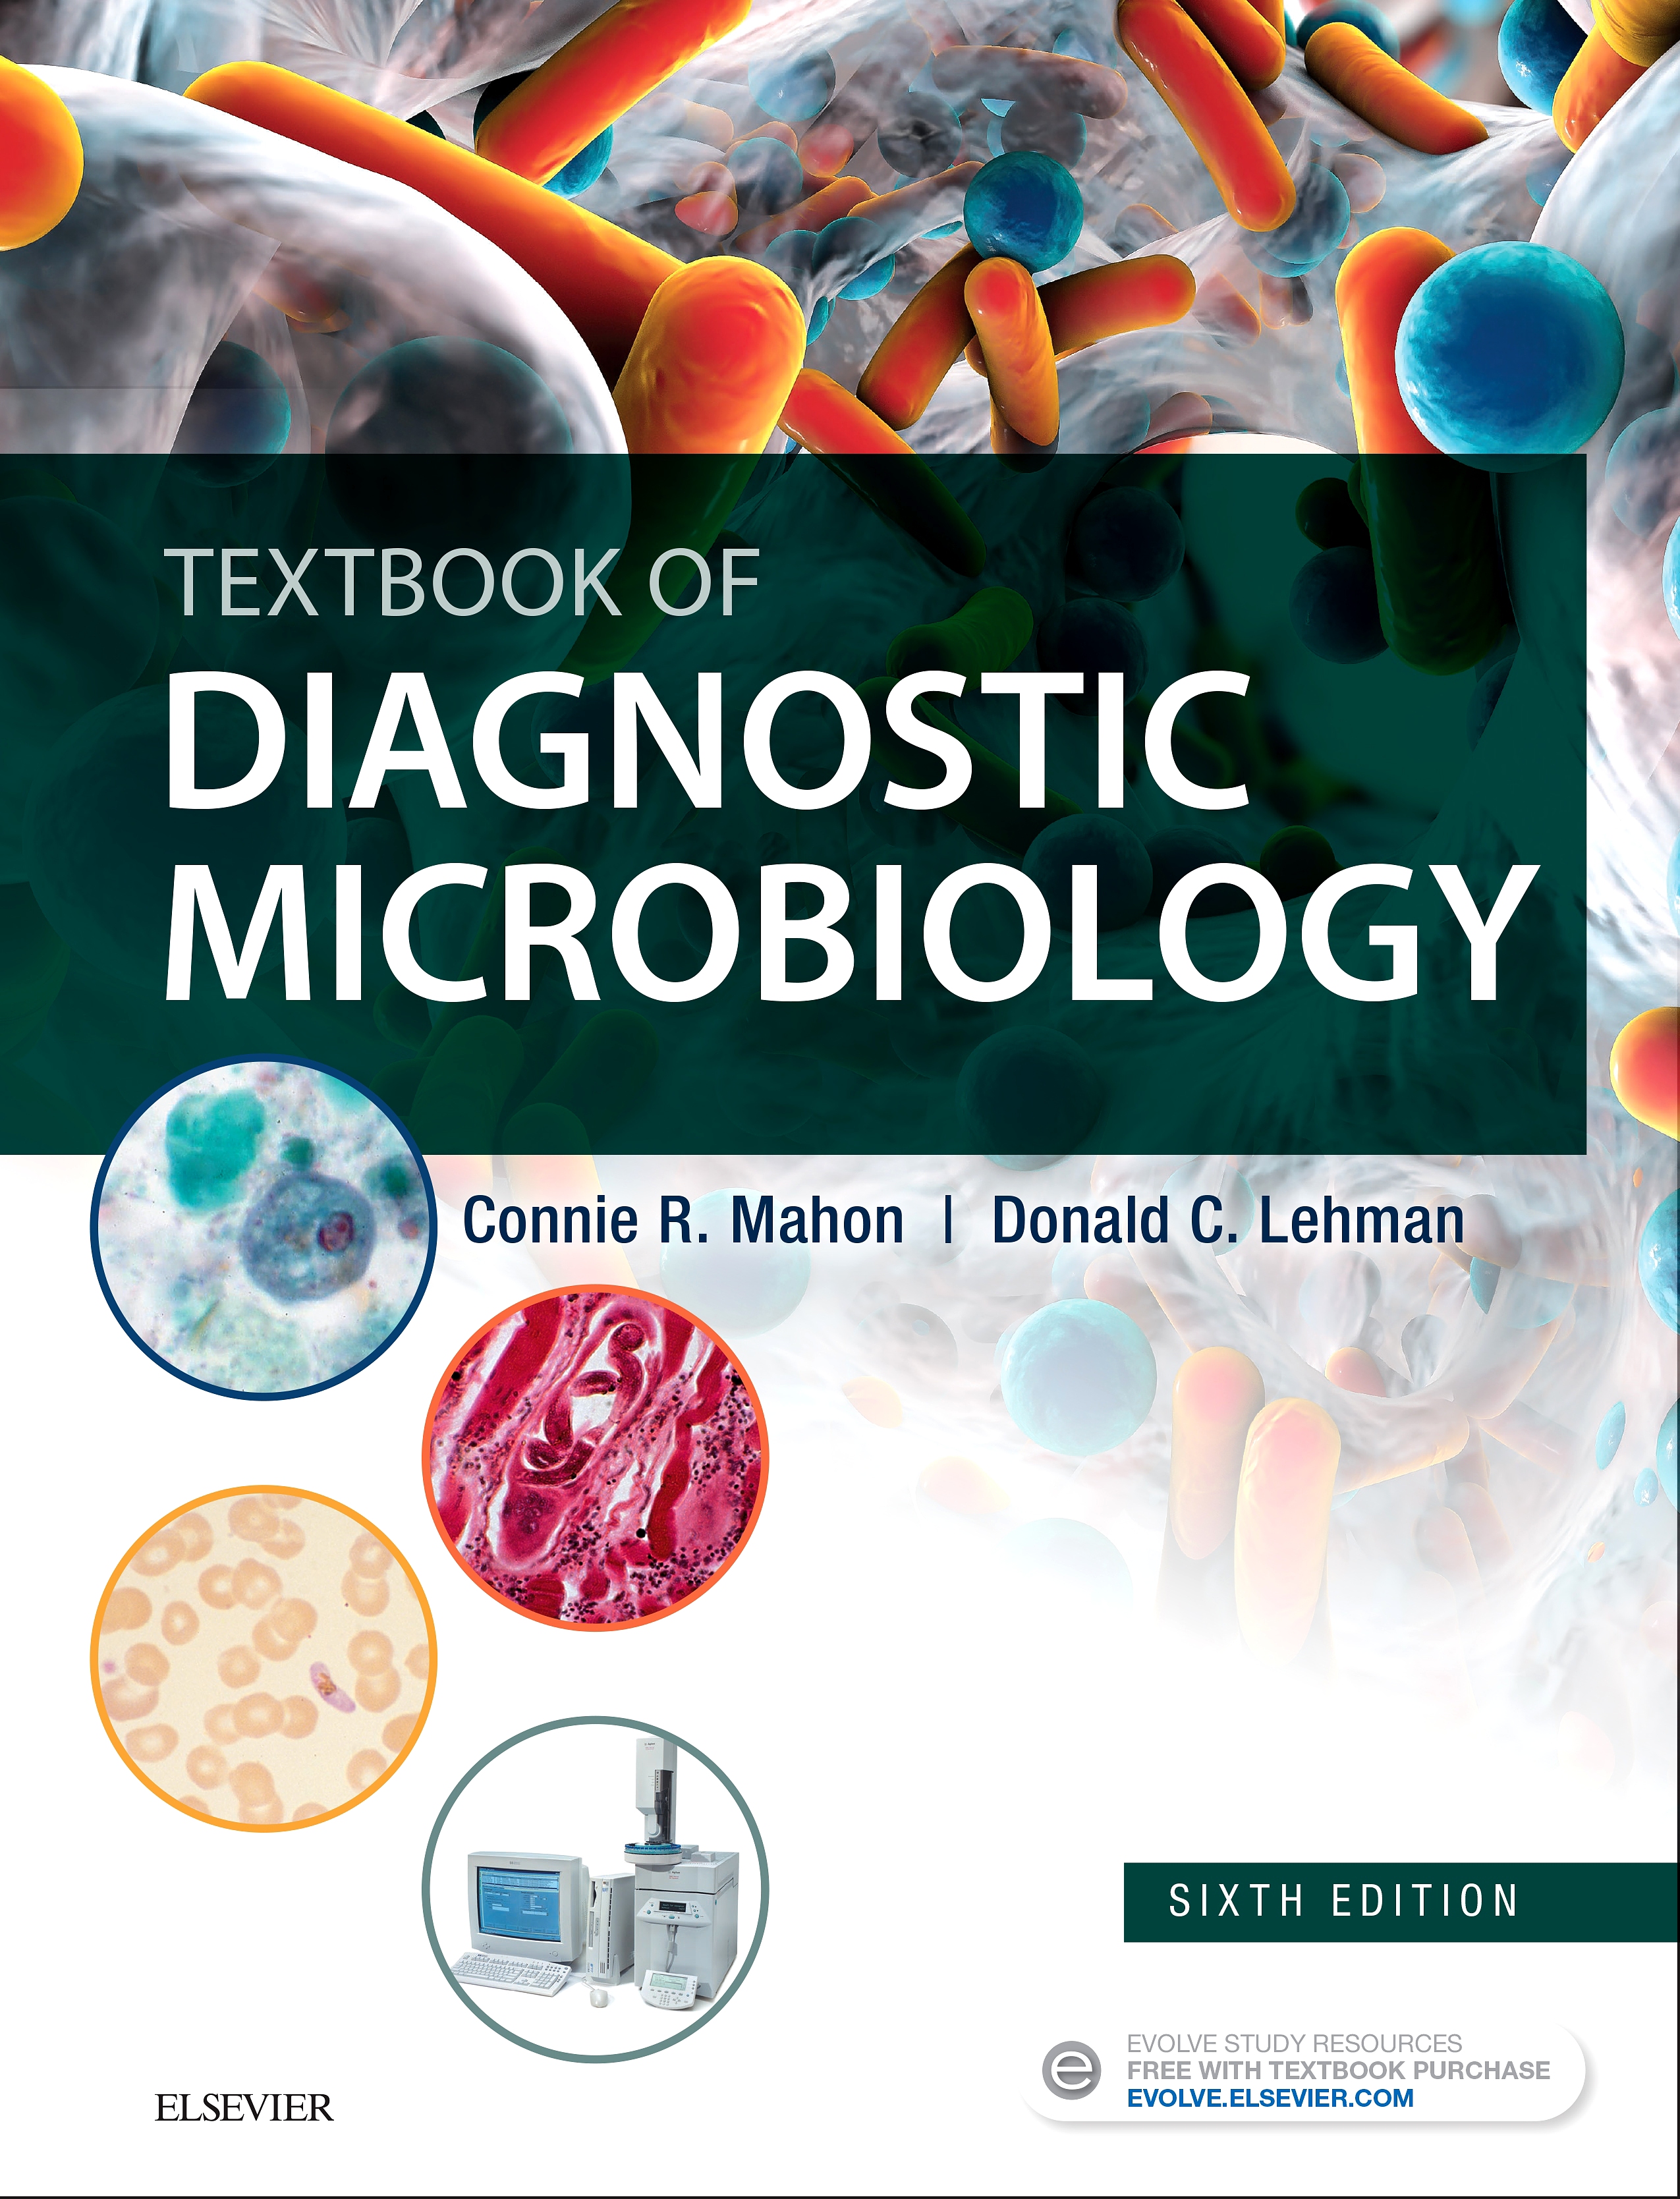 Evolve Resources for Textbook of Diagnostic Microbiology, 6th